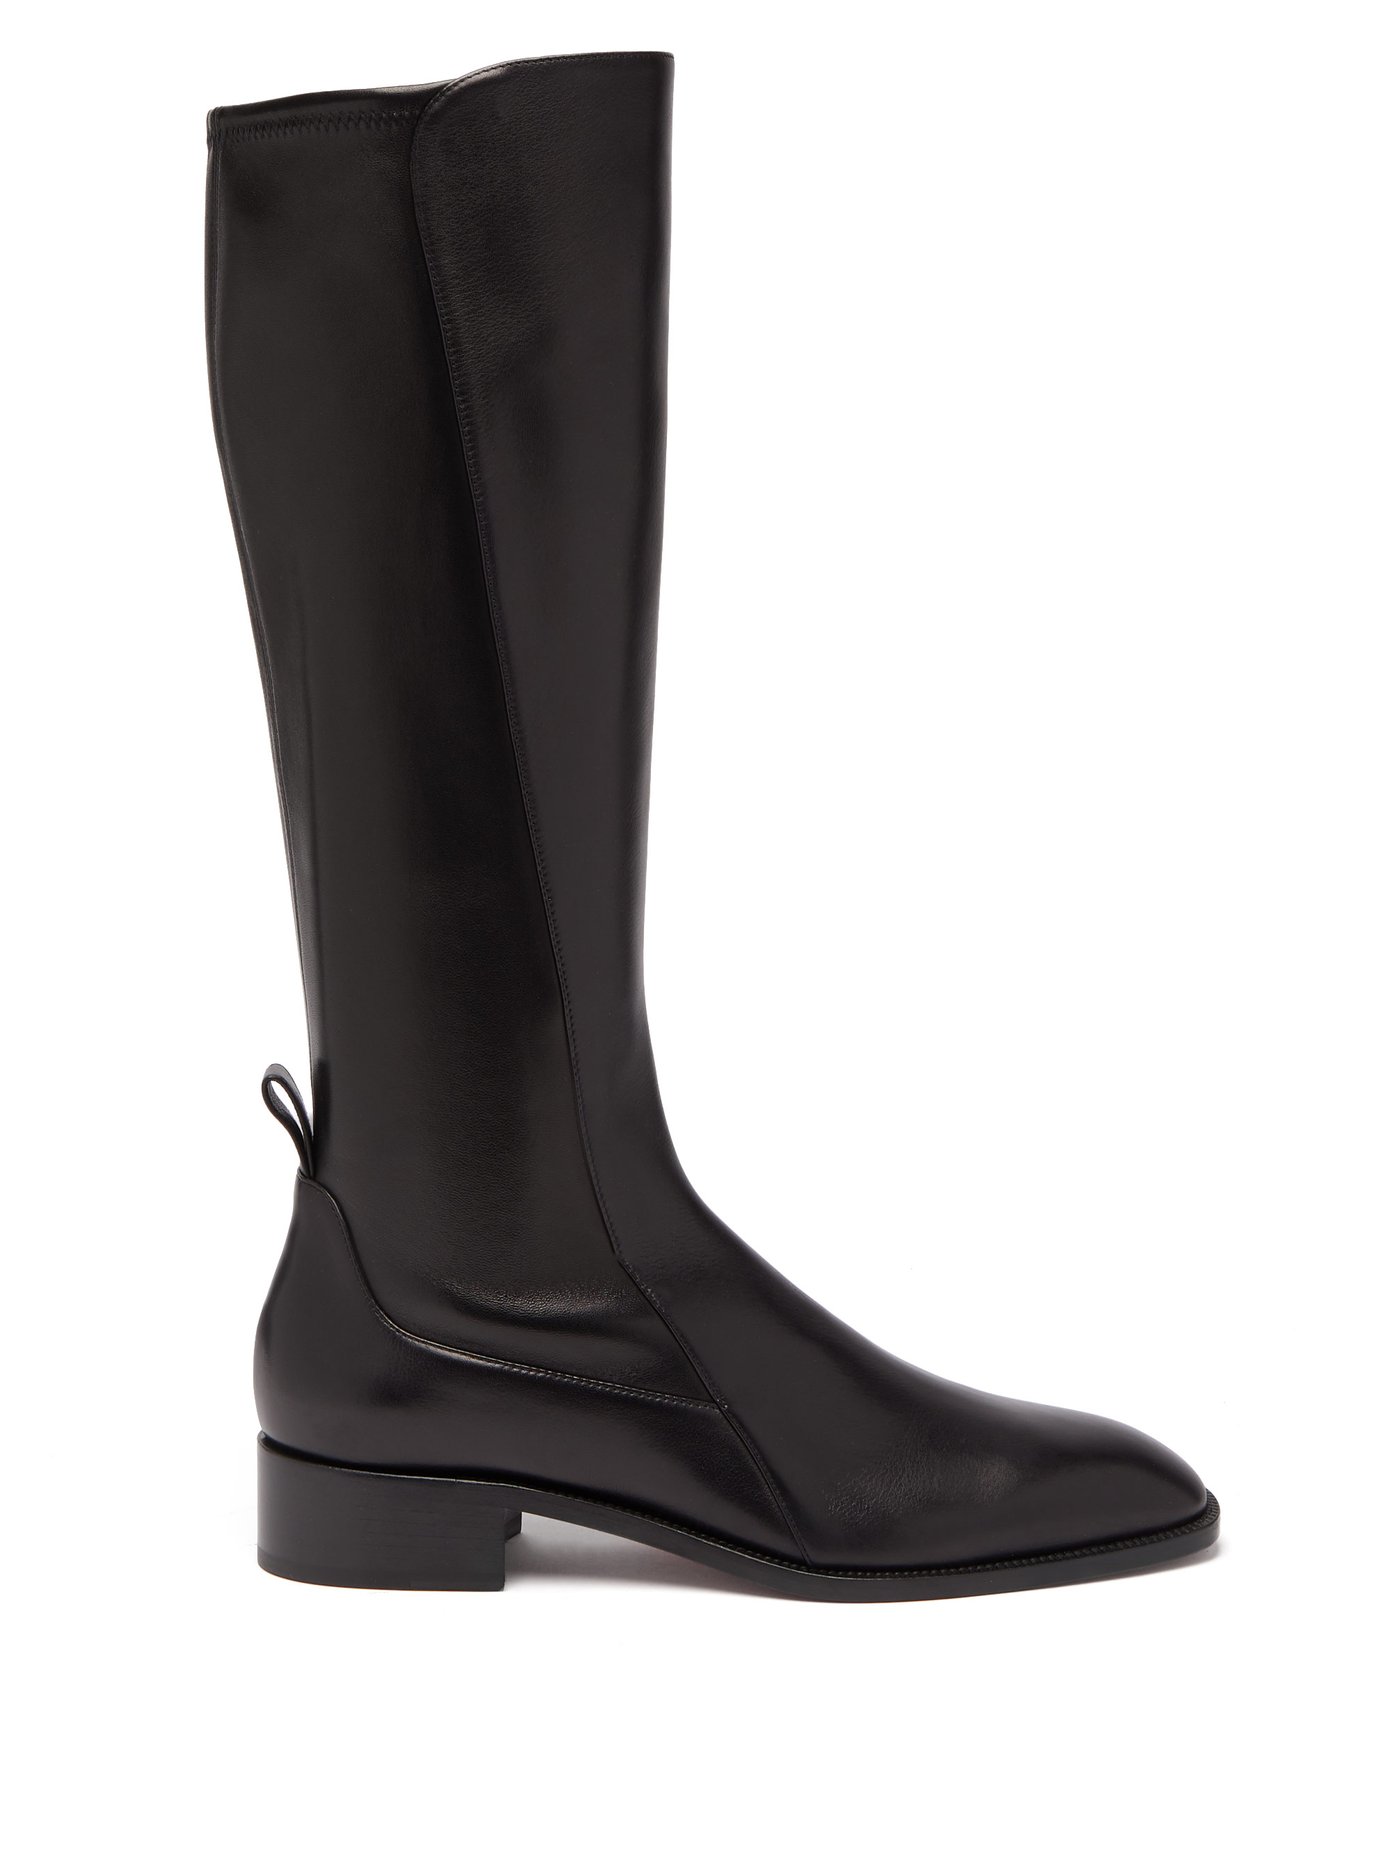 Tagastretch leather knee-high boots 